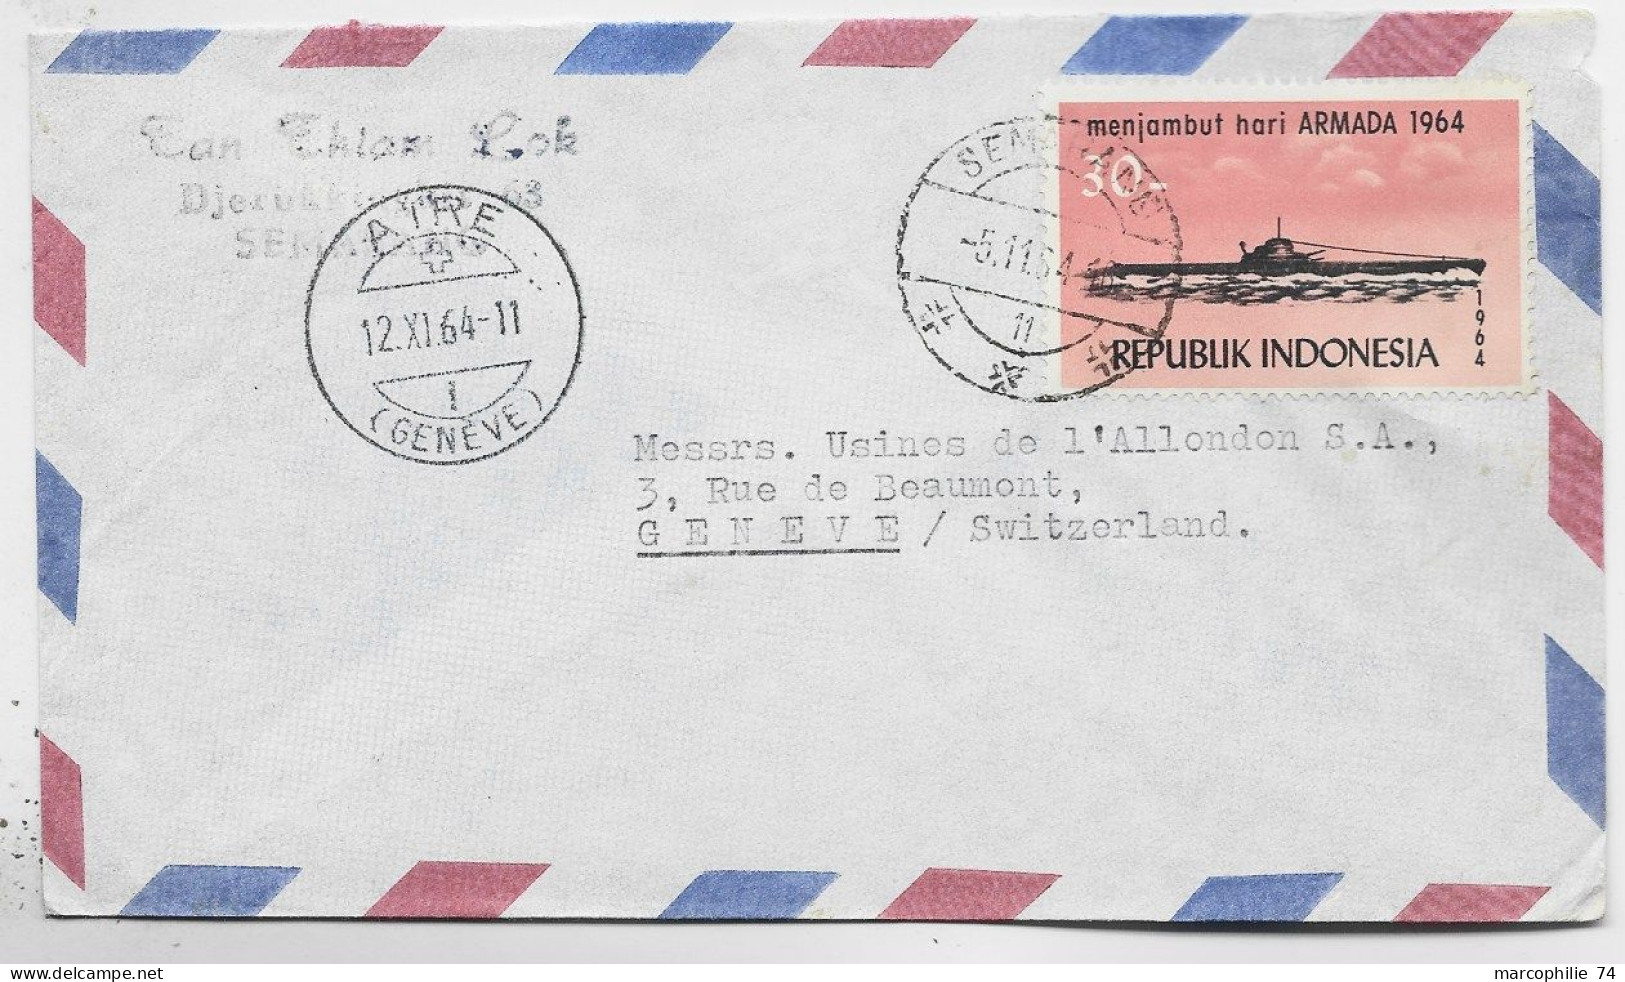 INDONESIA 30C SOUS MARIN SOLO LETTRE COVER AIR MAIL SEMARANG 5.11.1964 TO SUISSE AIRE GENEVE - Indonésie